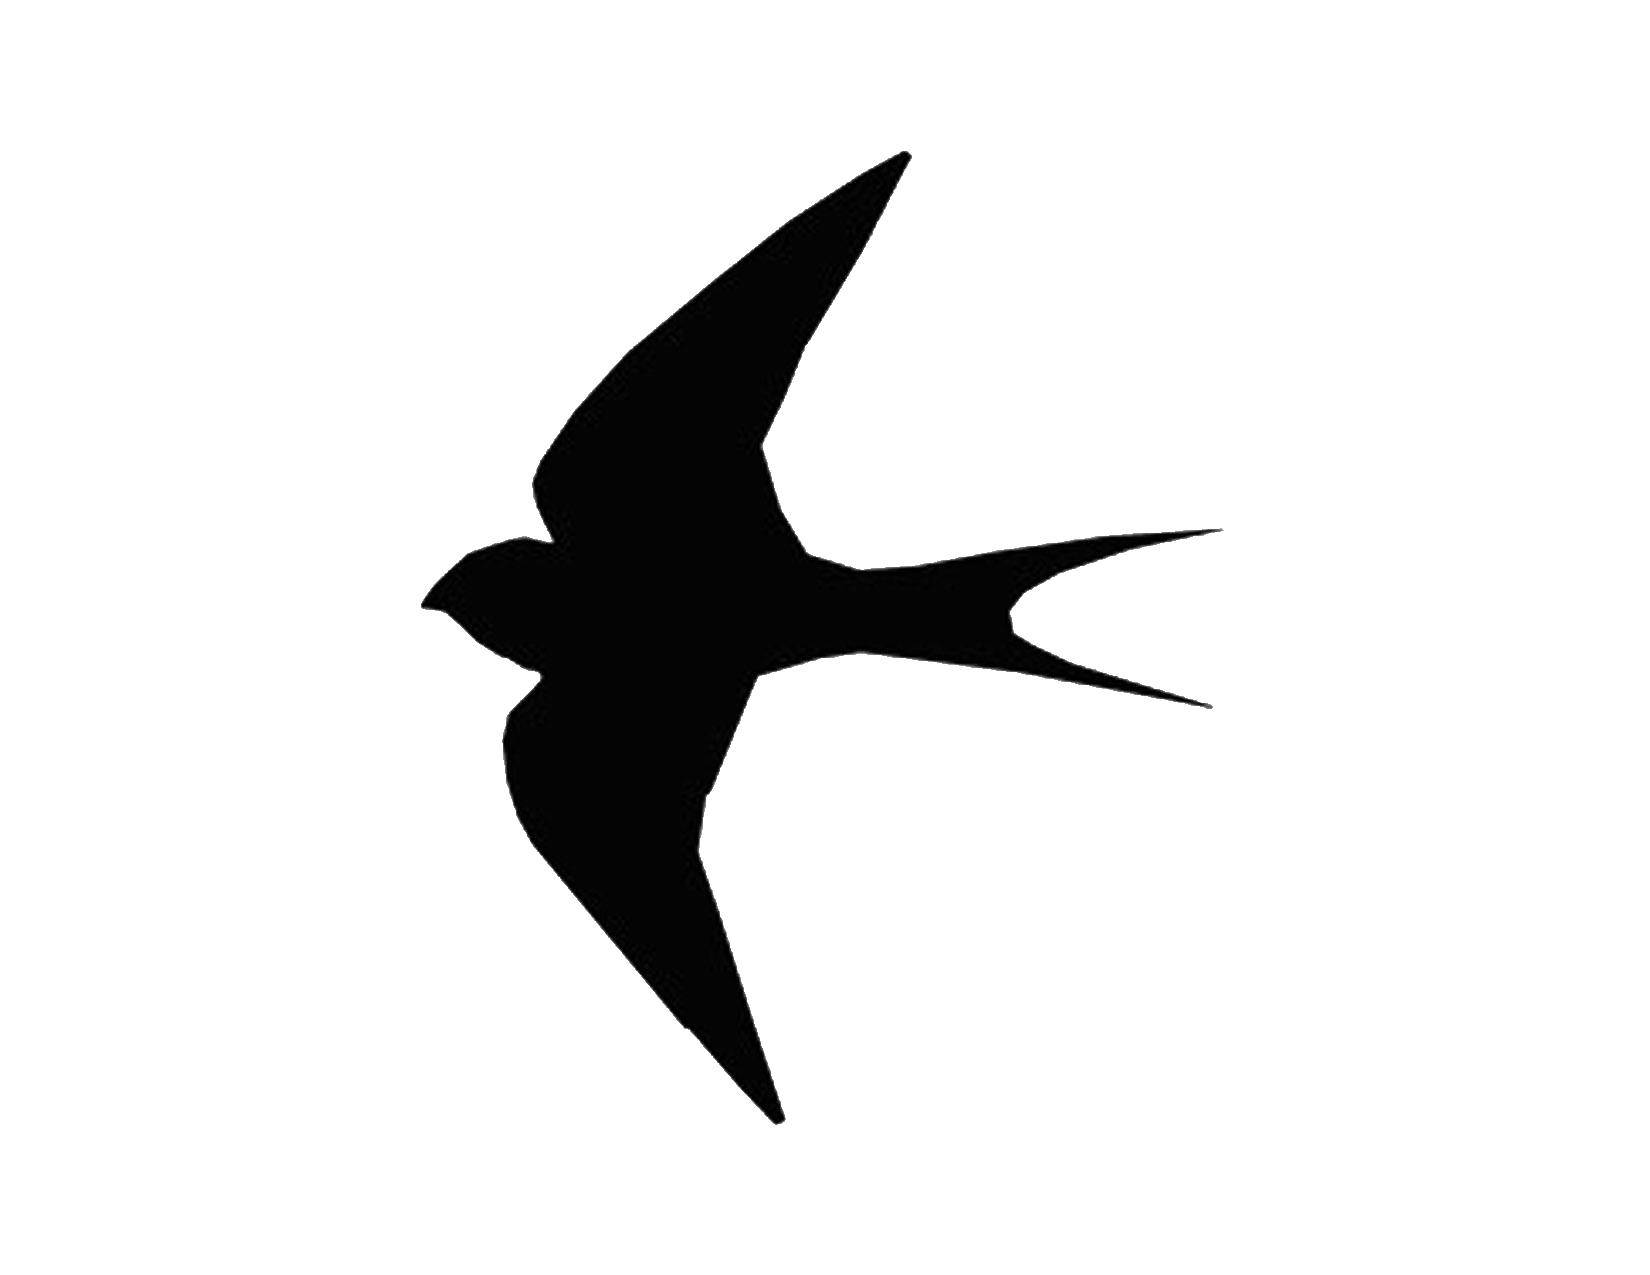 Coloring Swallow outline. Category The contours for cutting out the birds. Tags:  Birds, swallow.